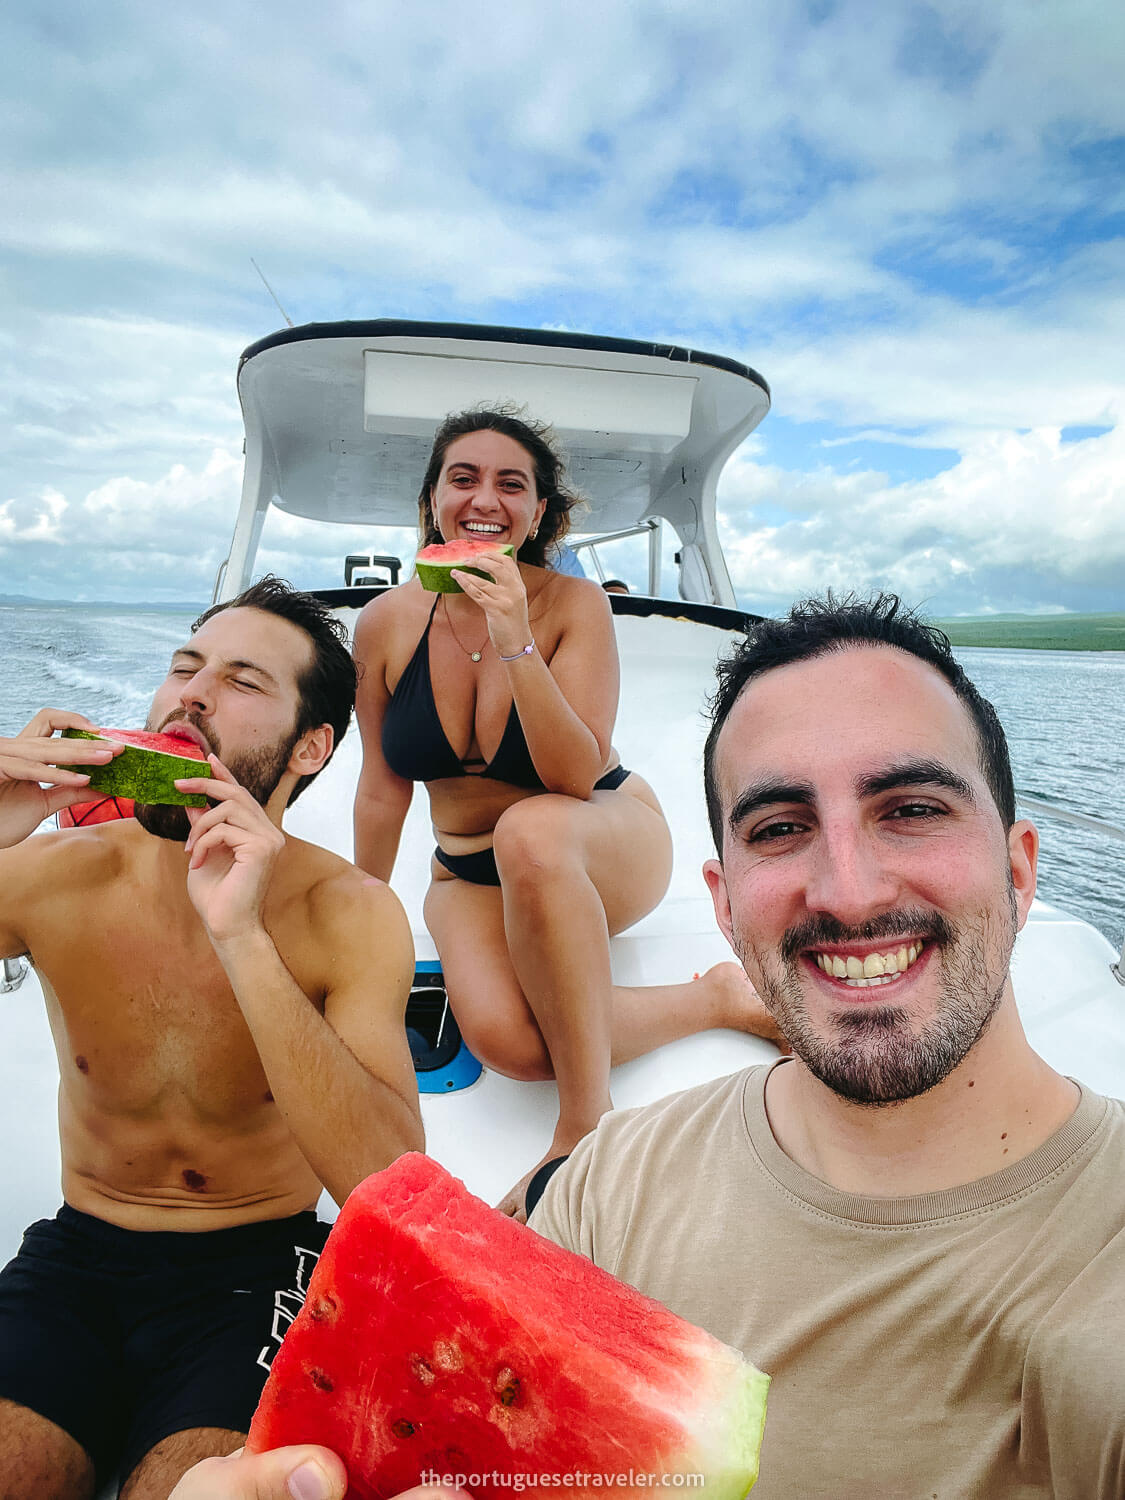 Post-dive watermelon on the deck of the boat